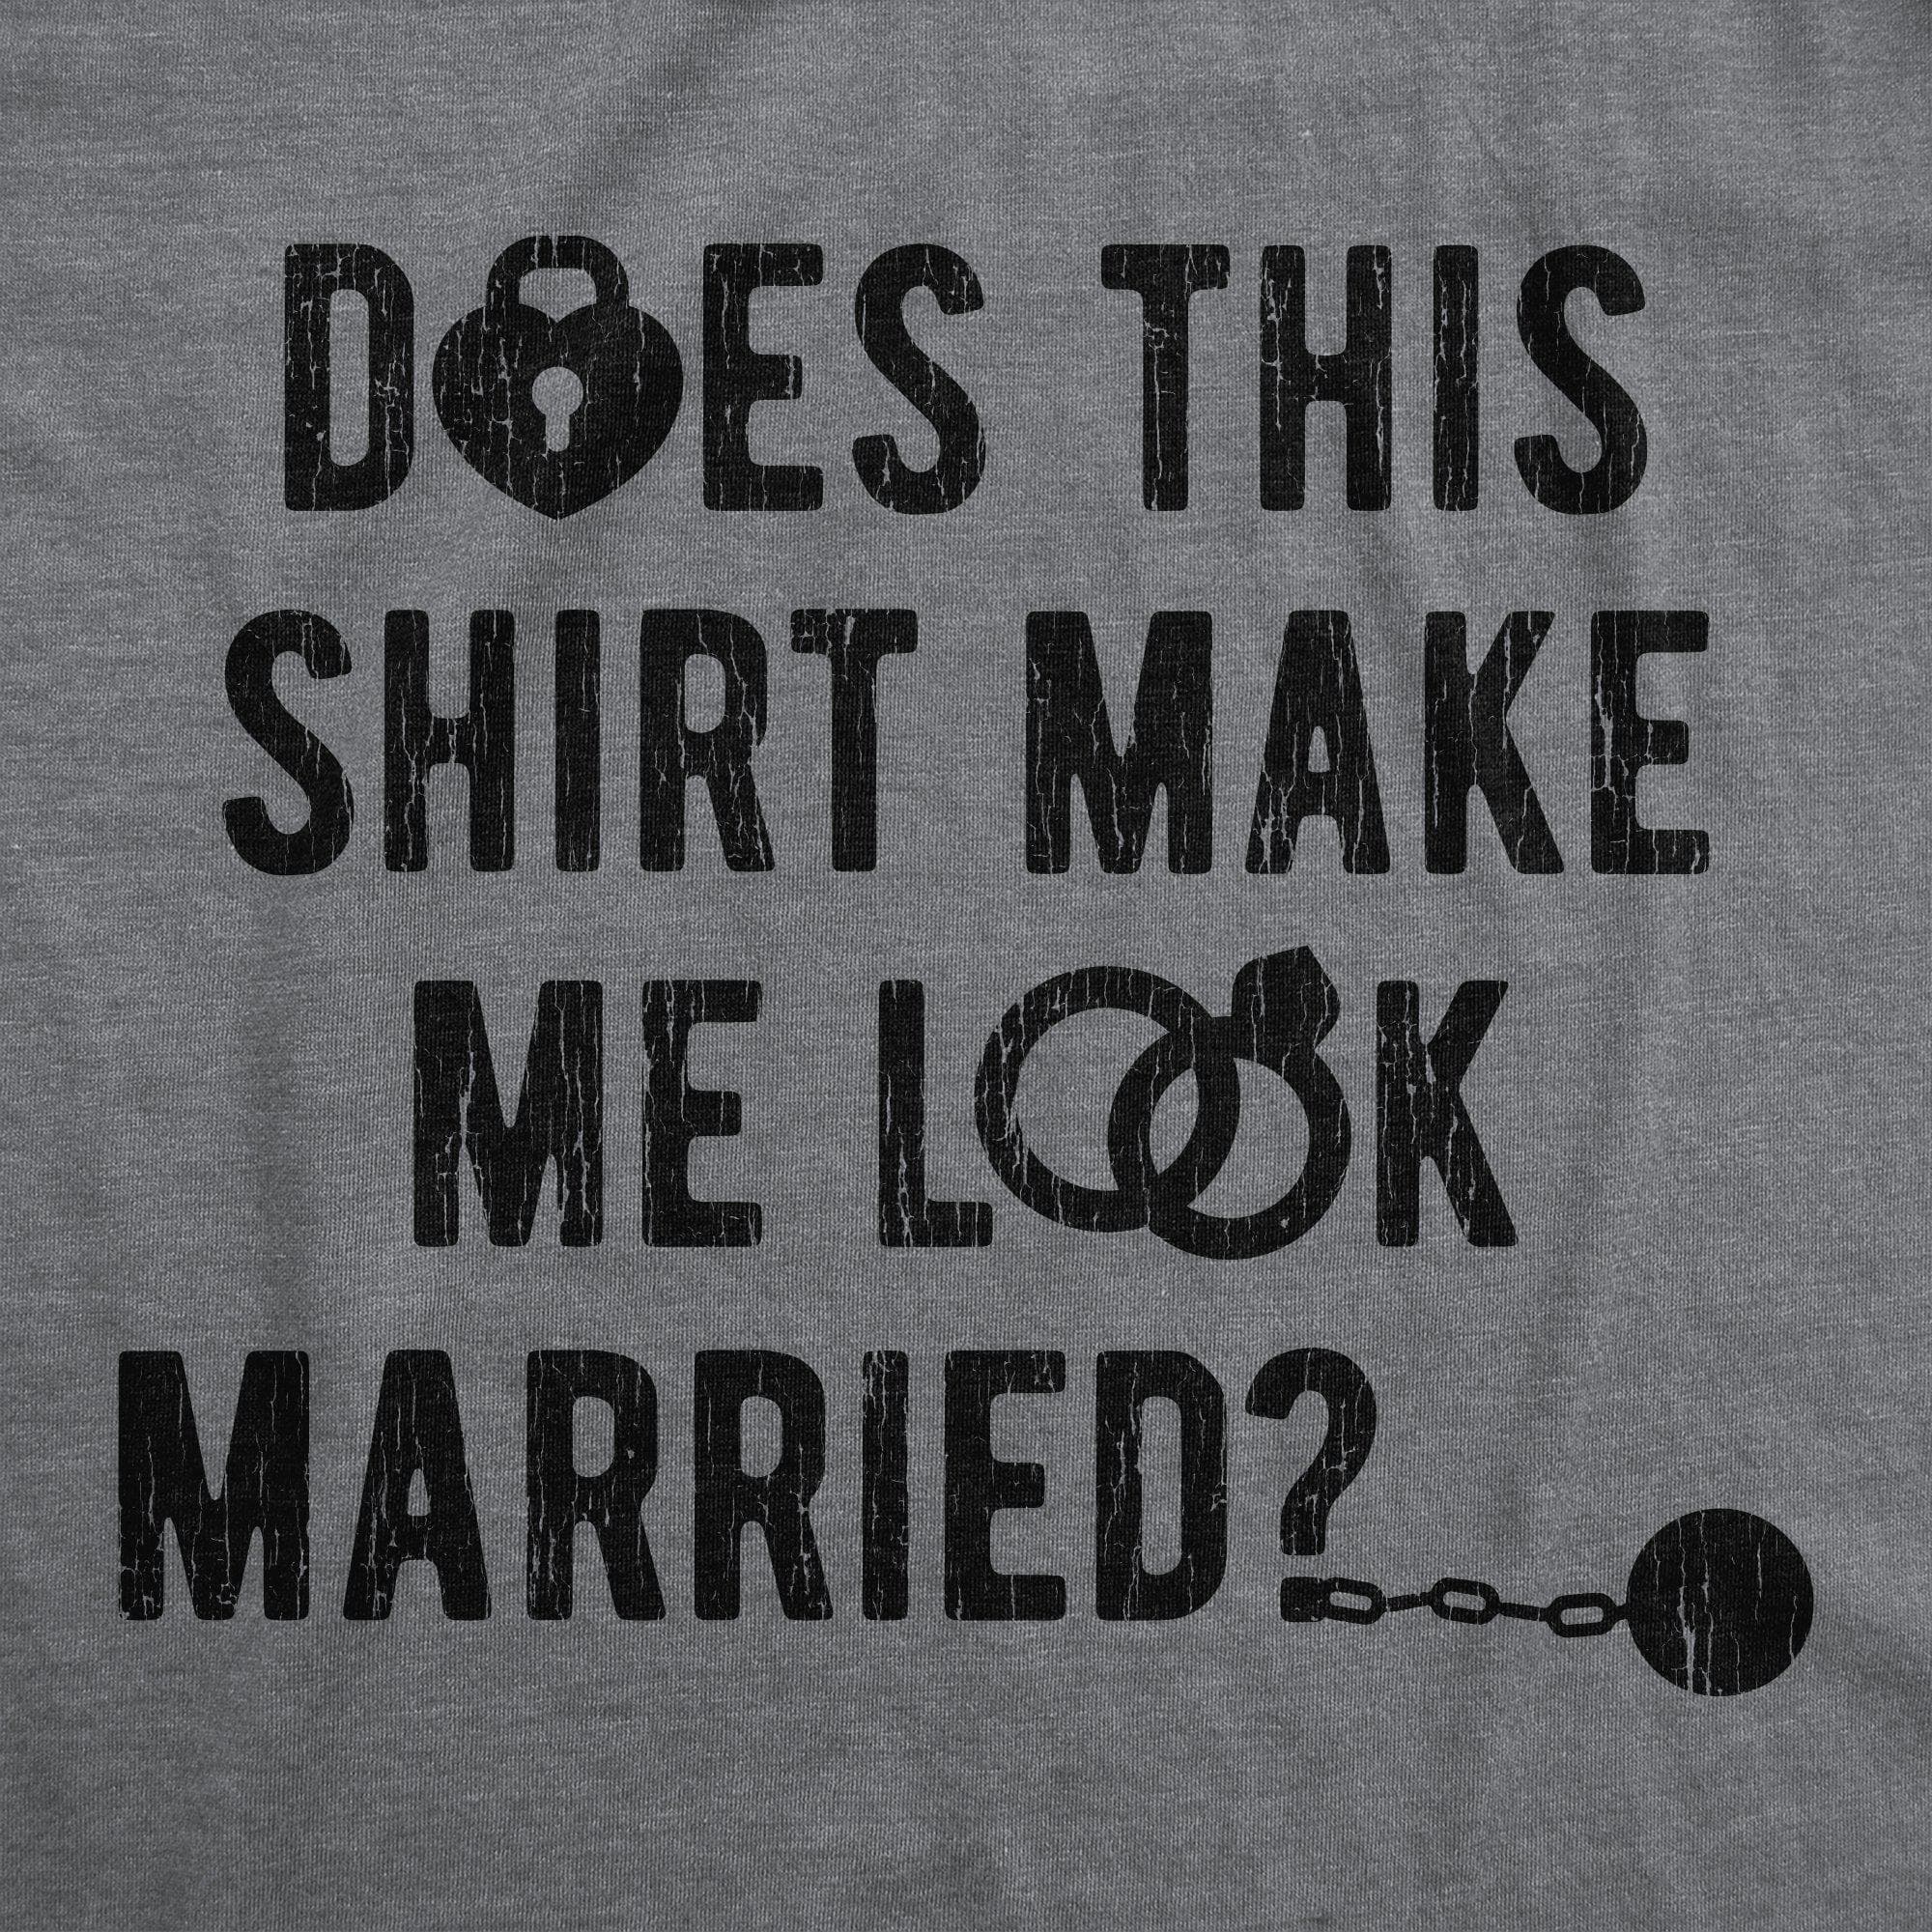 Deos This Shirt Make Me Look Married? Men's Tshirt - Crazy Dog T-Shirts